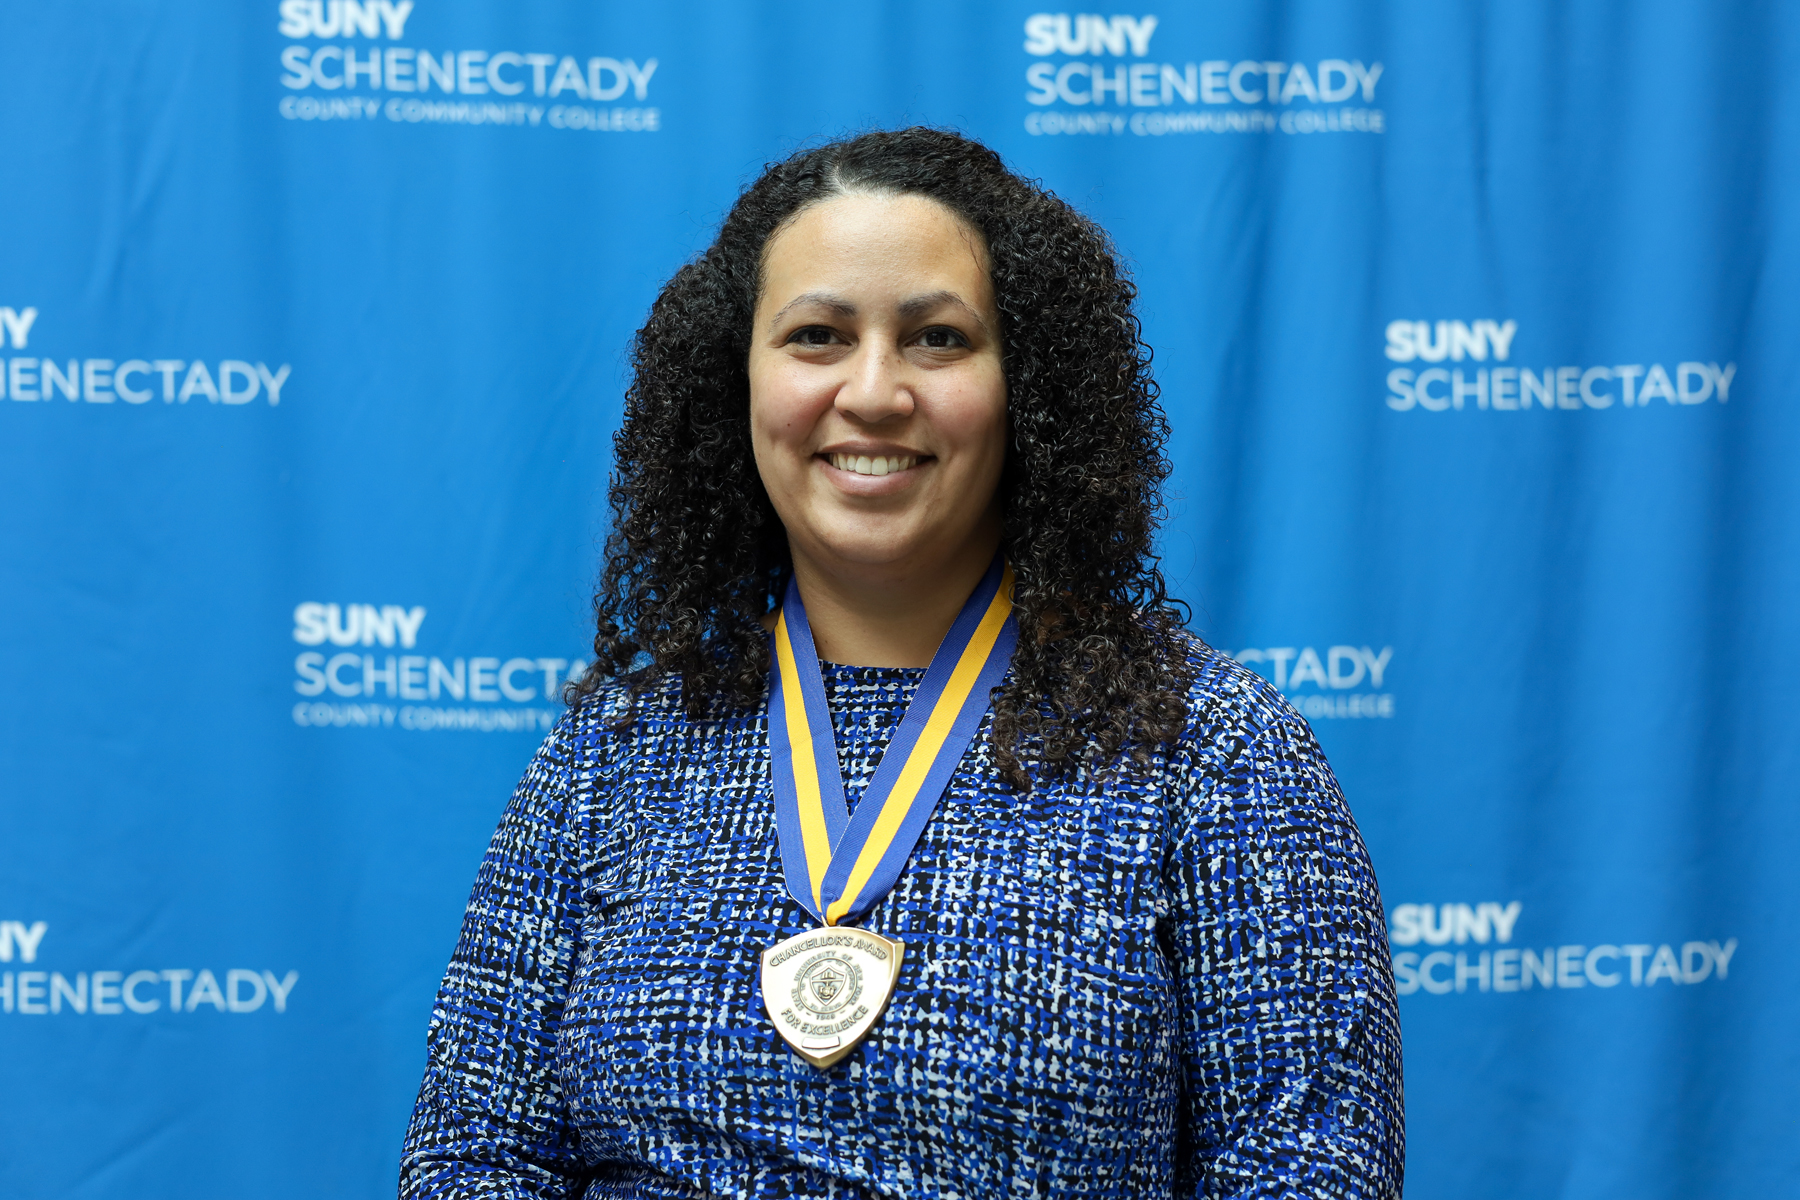 Catia Laird de Polanco wearing award medallion in front of College backdrop, smiling